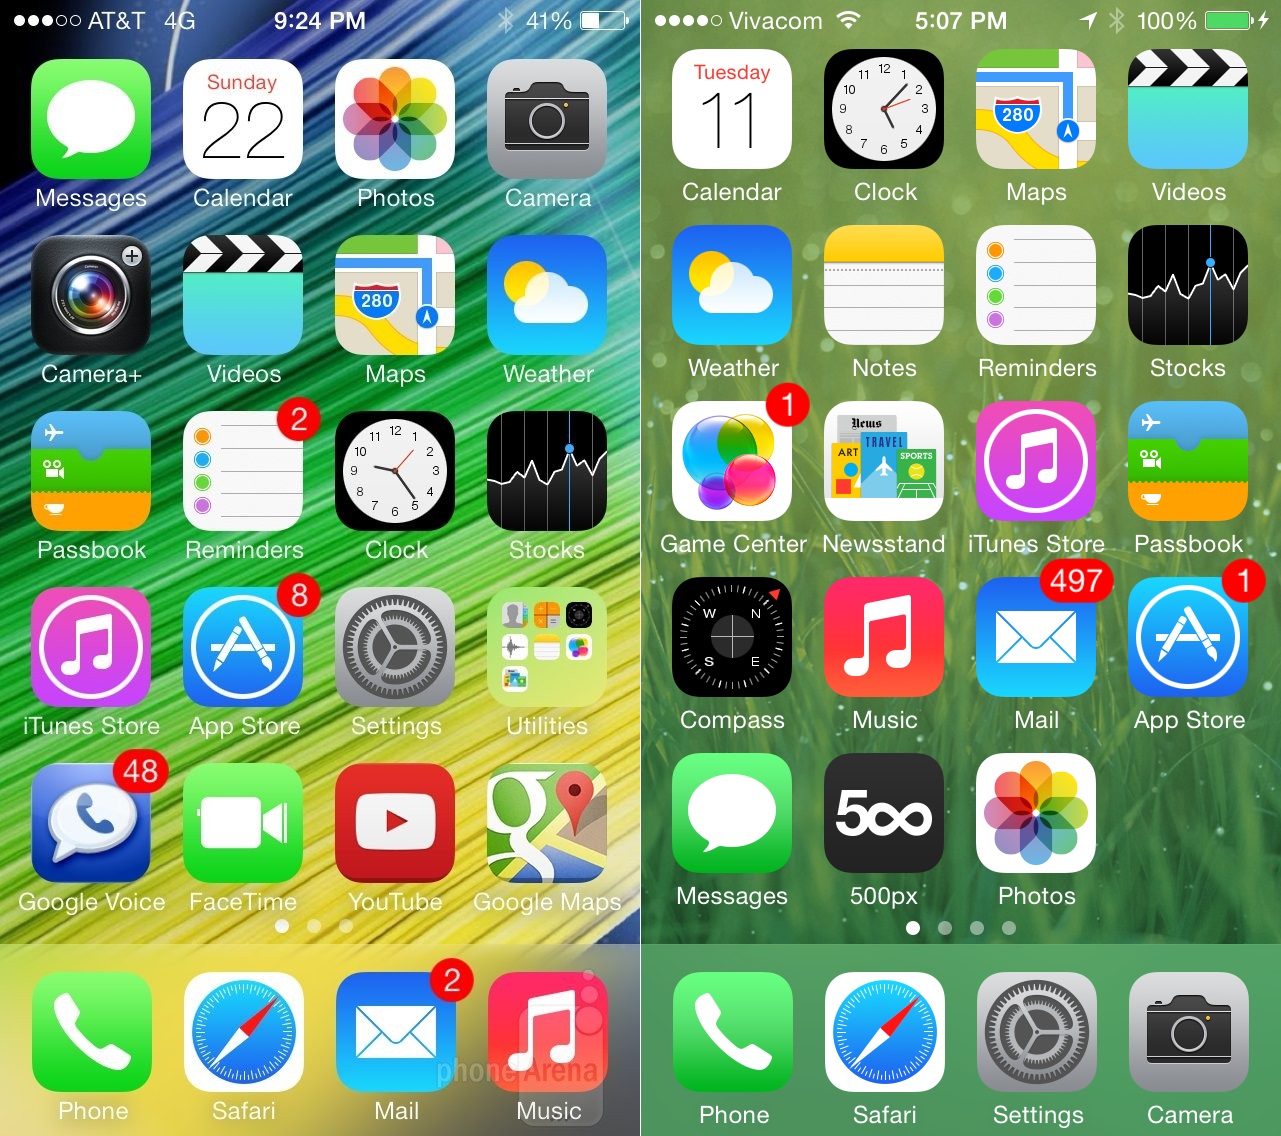 Slightly different icons: a different shade of... green